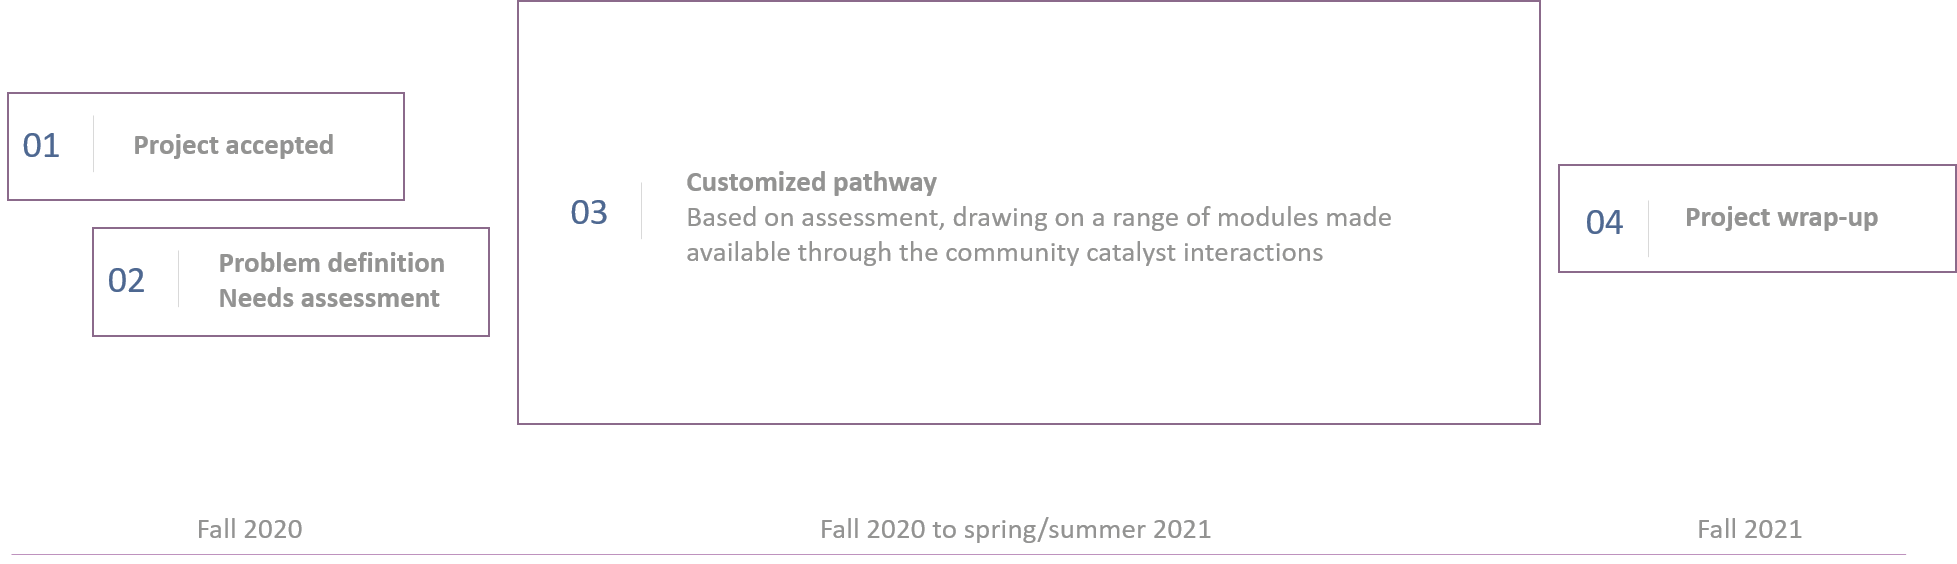 A timeline for the model, starting with intake and problem definition in fall 2020, moving to a larger block around a customized programme from fall 2020 to spring/summer 2021, then project wrap-up in fall 2021.